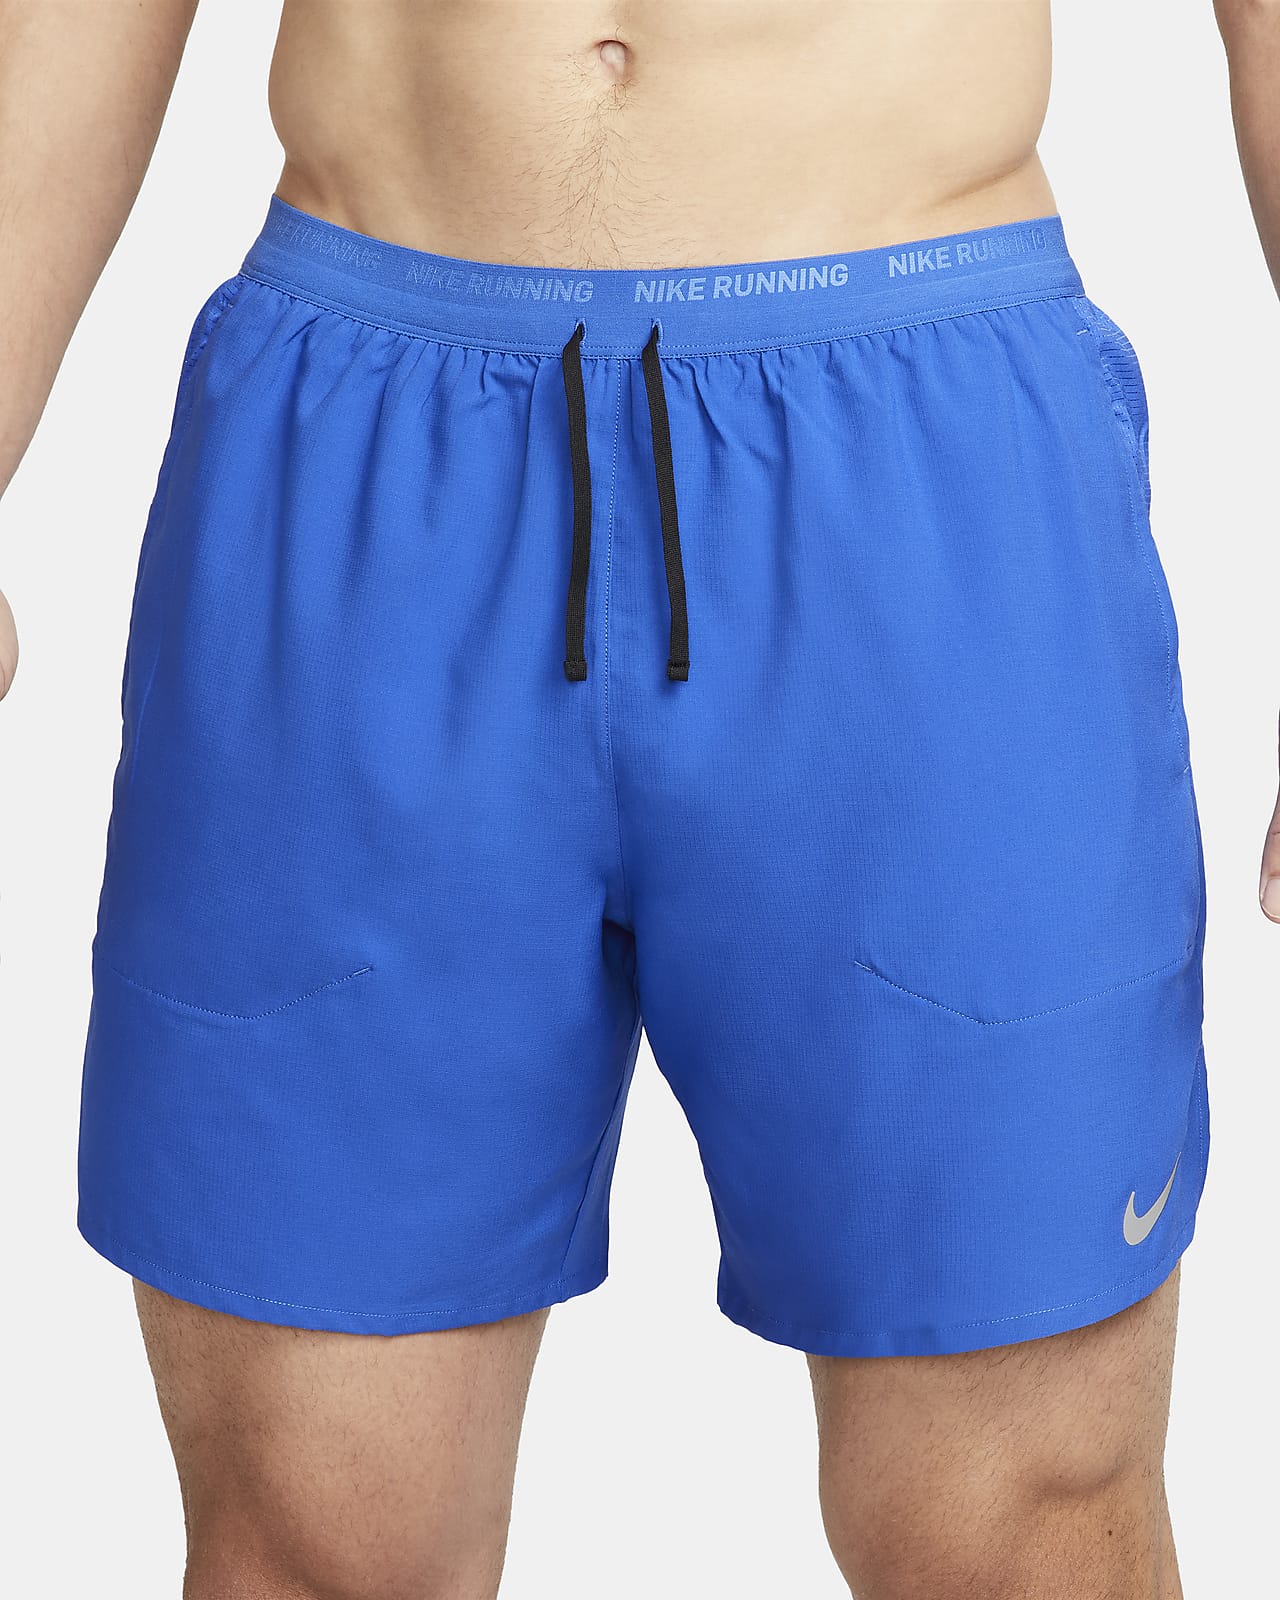 Nike running shorts with built in underwear. Never